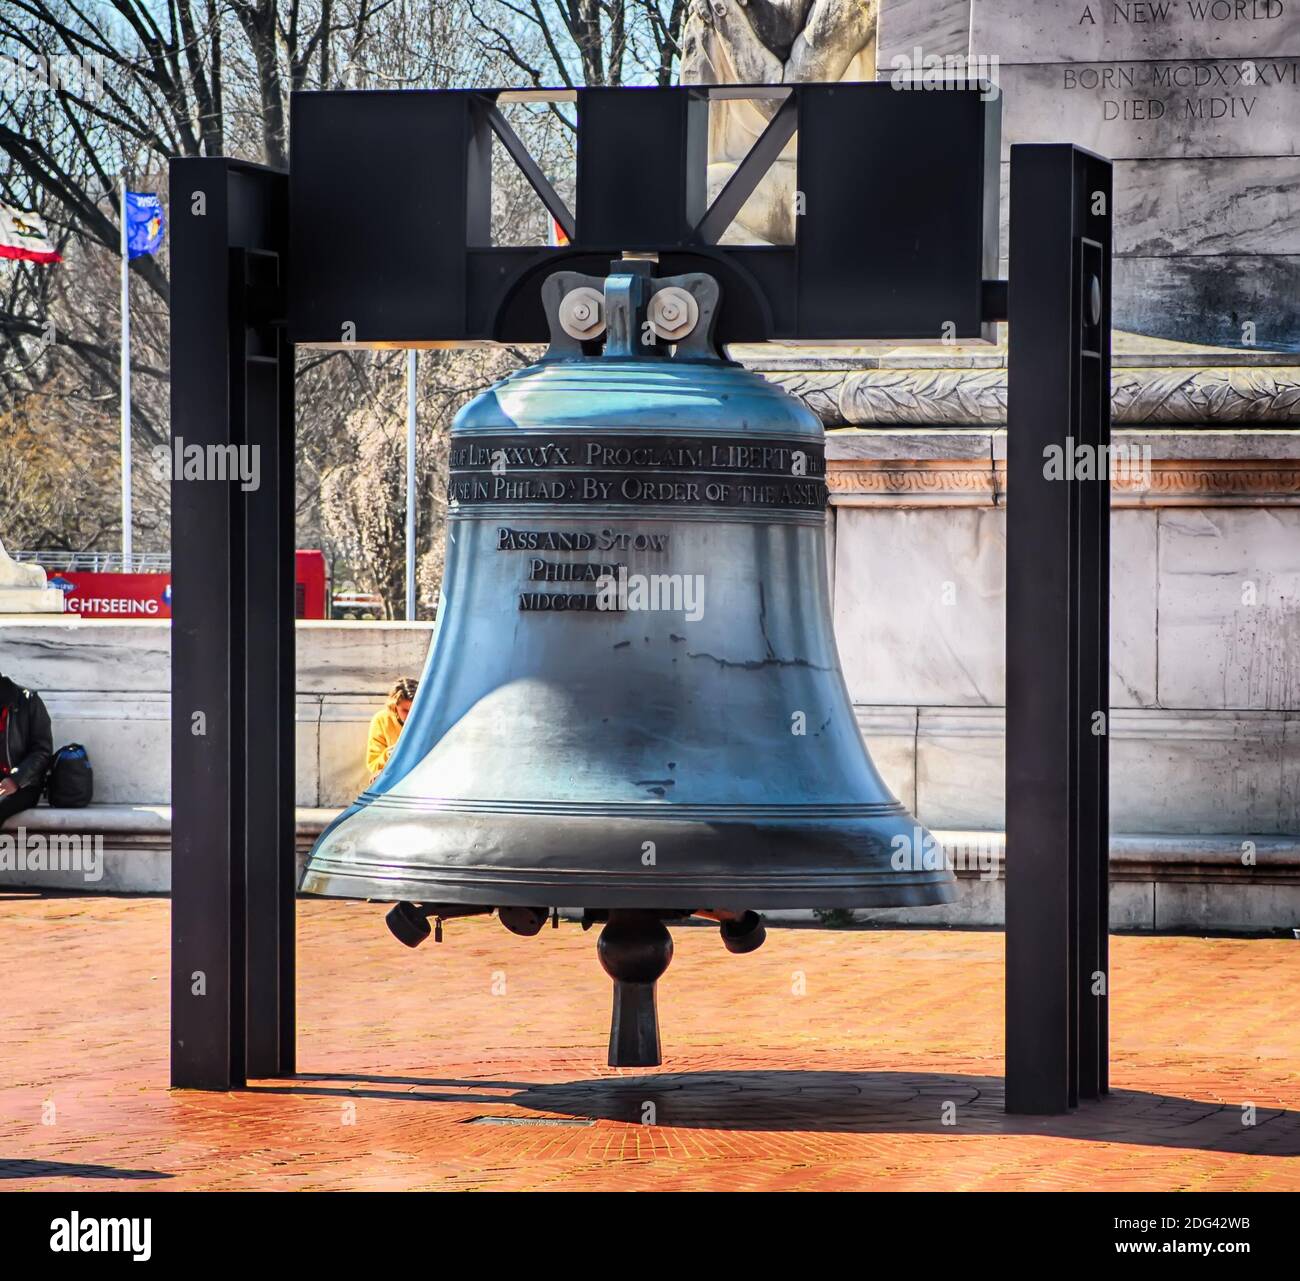 Liberty Bell replica in front of Union Station in Washington D.C. Stock Photo